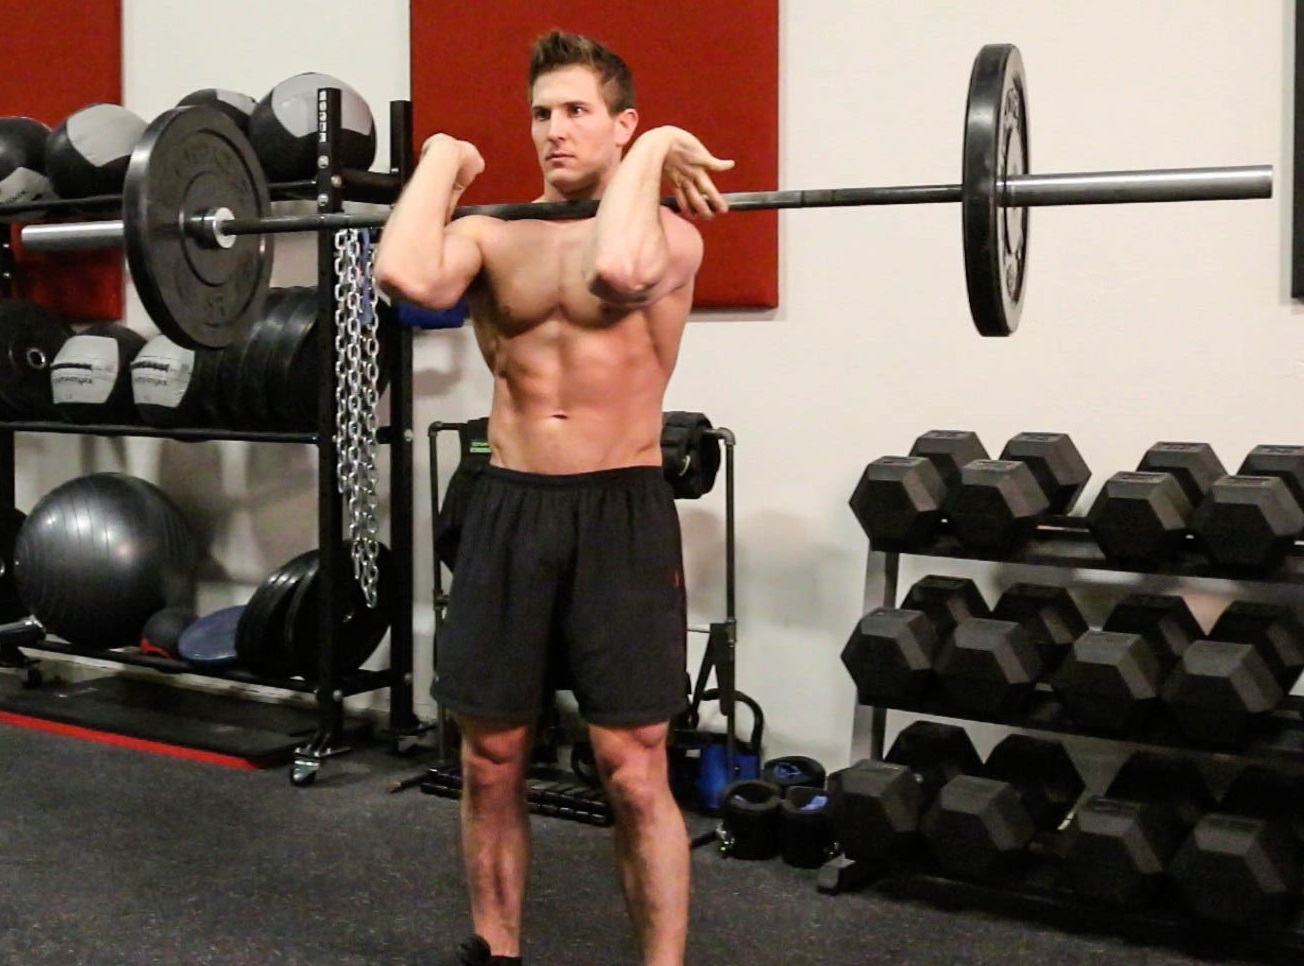 Now let’s take a look at the barbell front squat. 